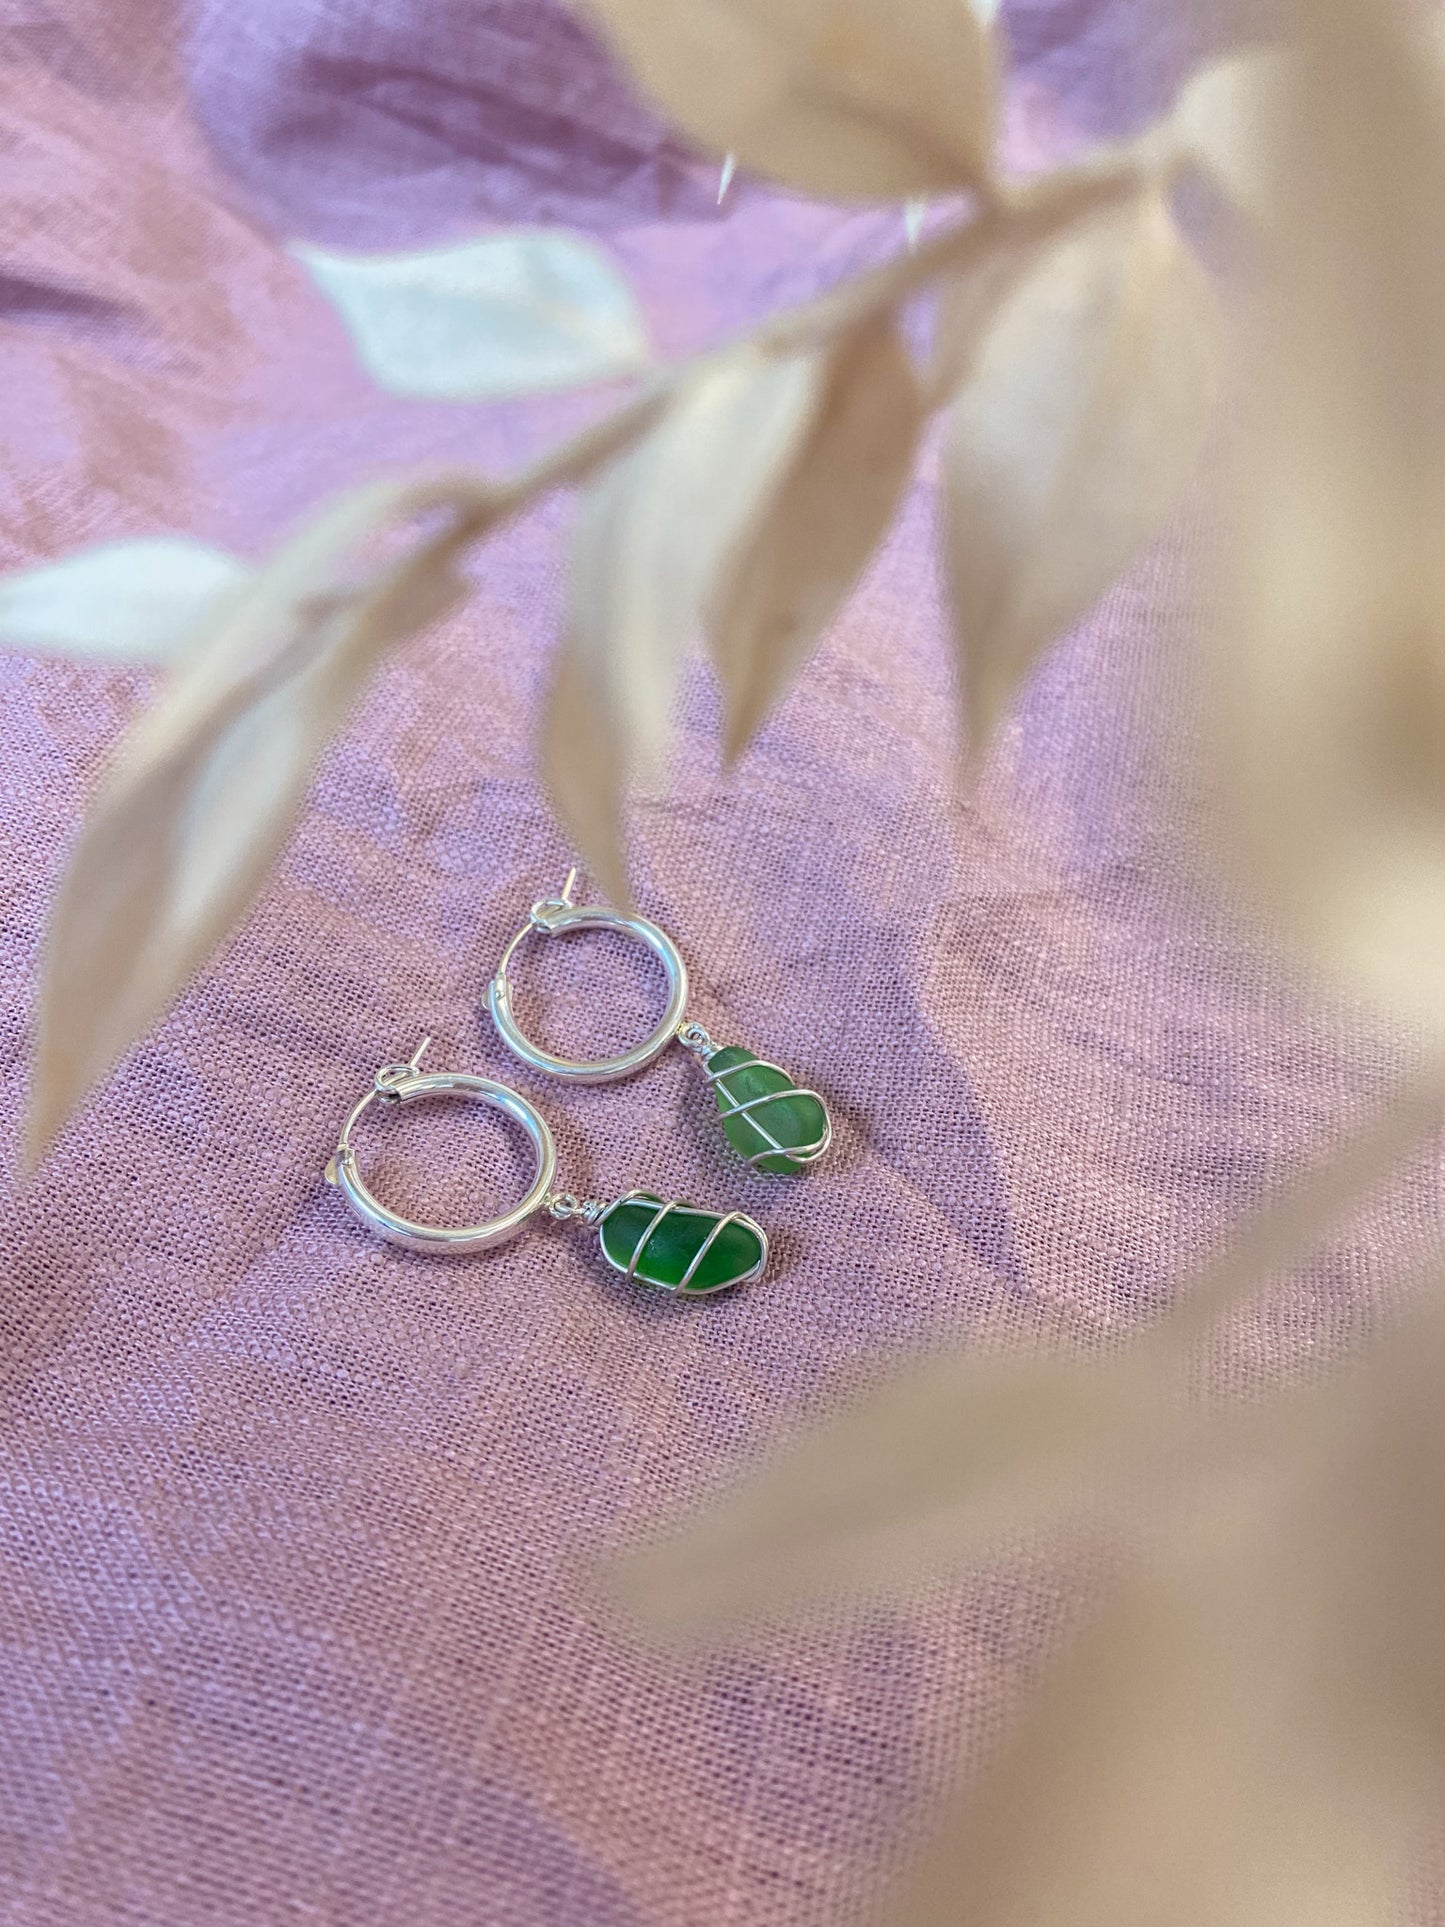 Leone Hoops in Sterling Silver & Bright Green